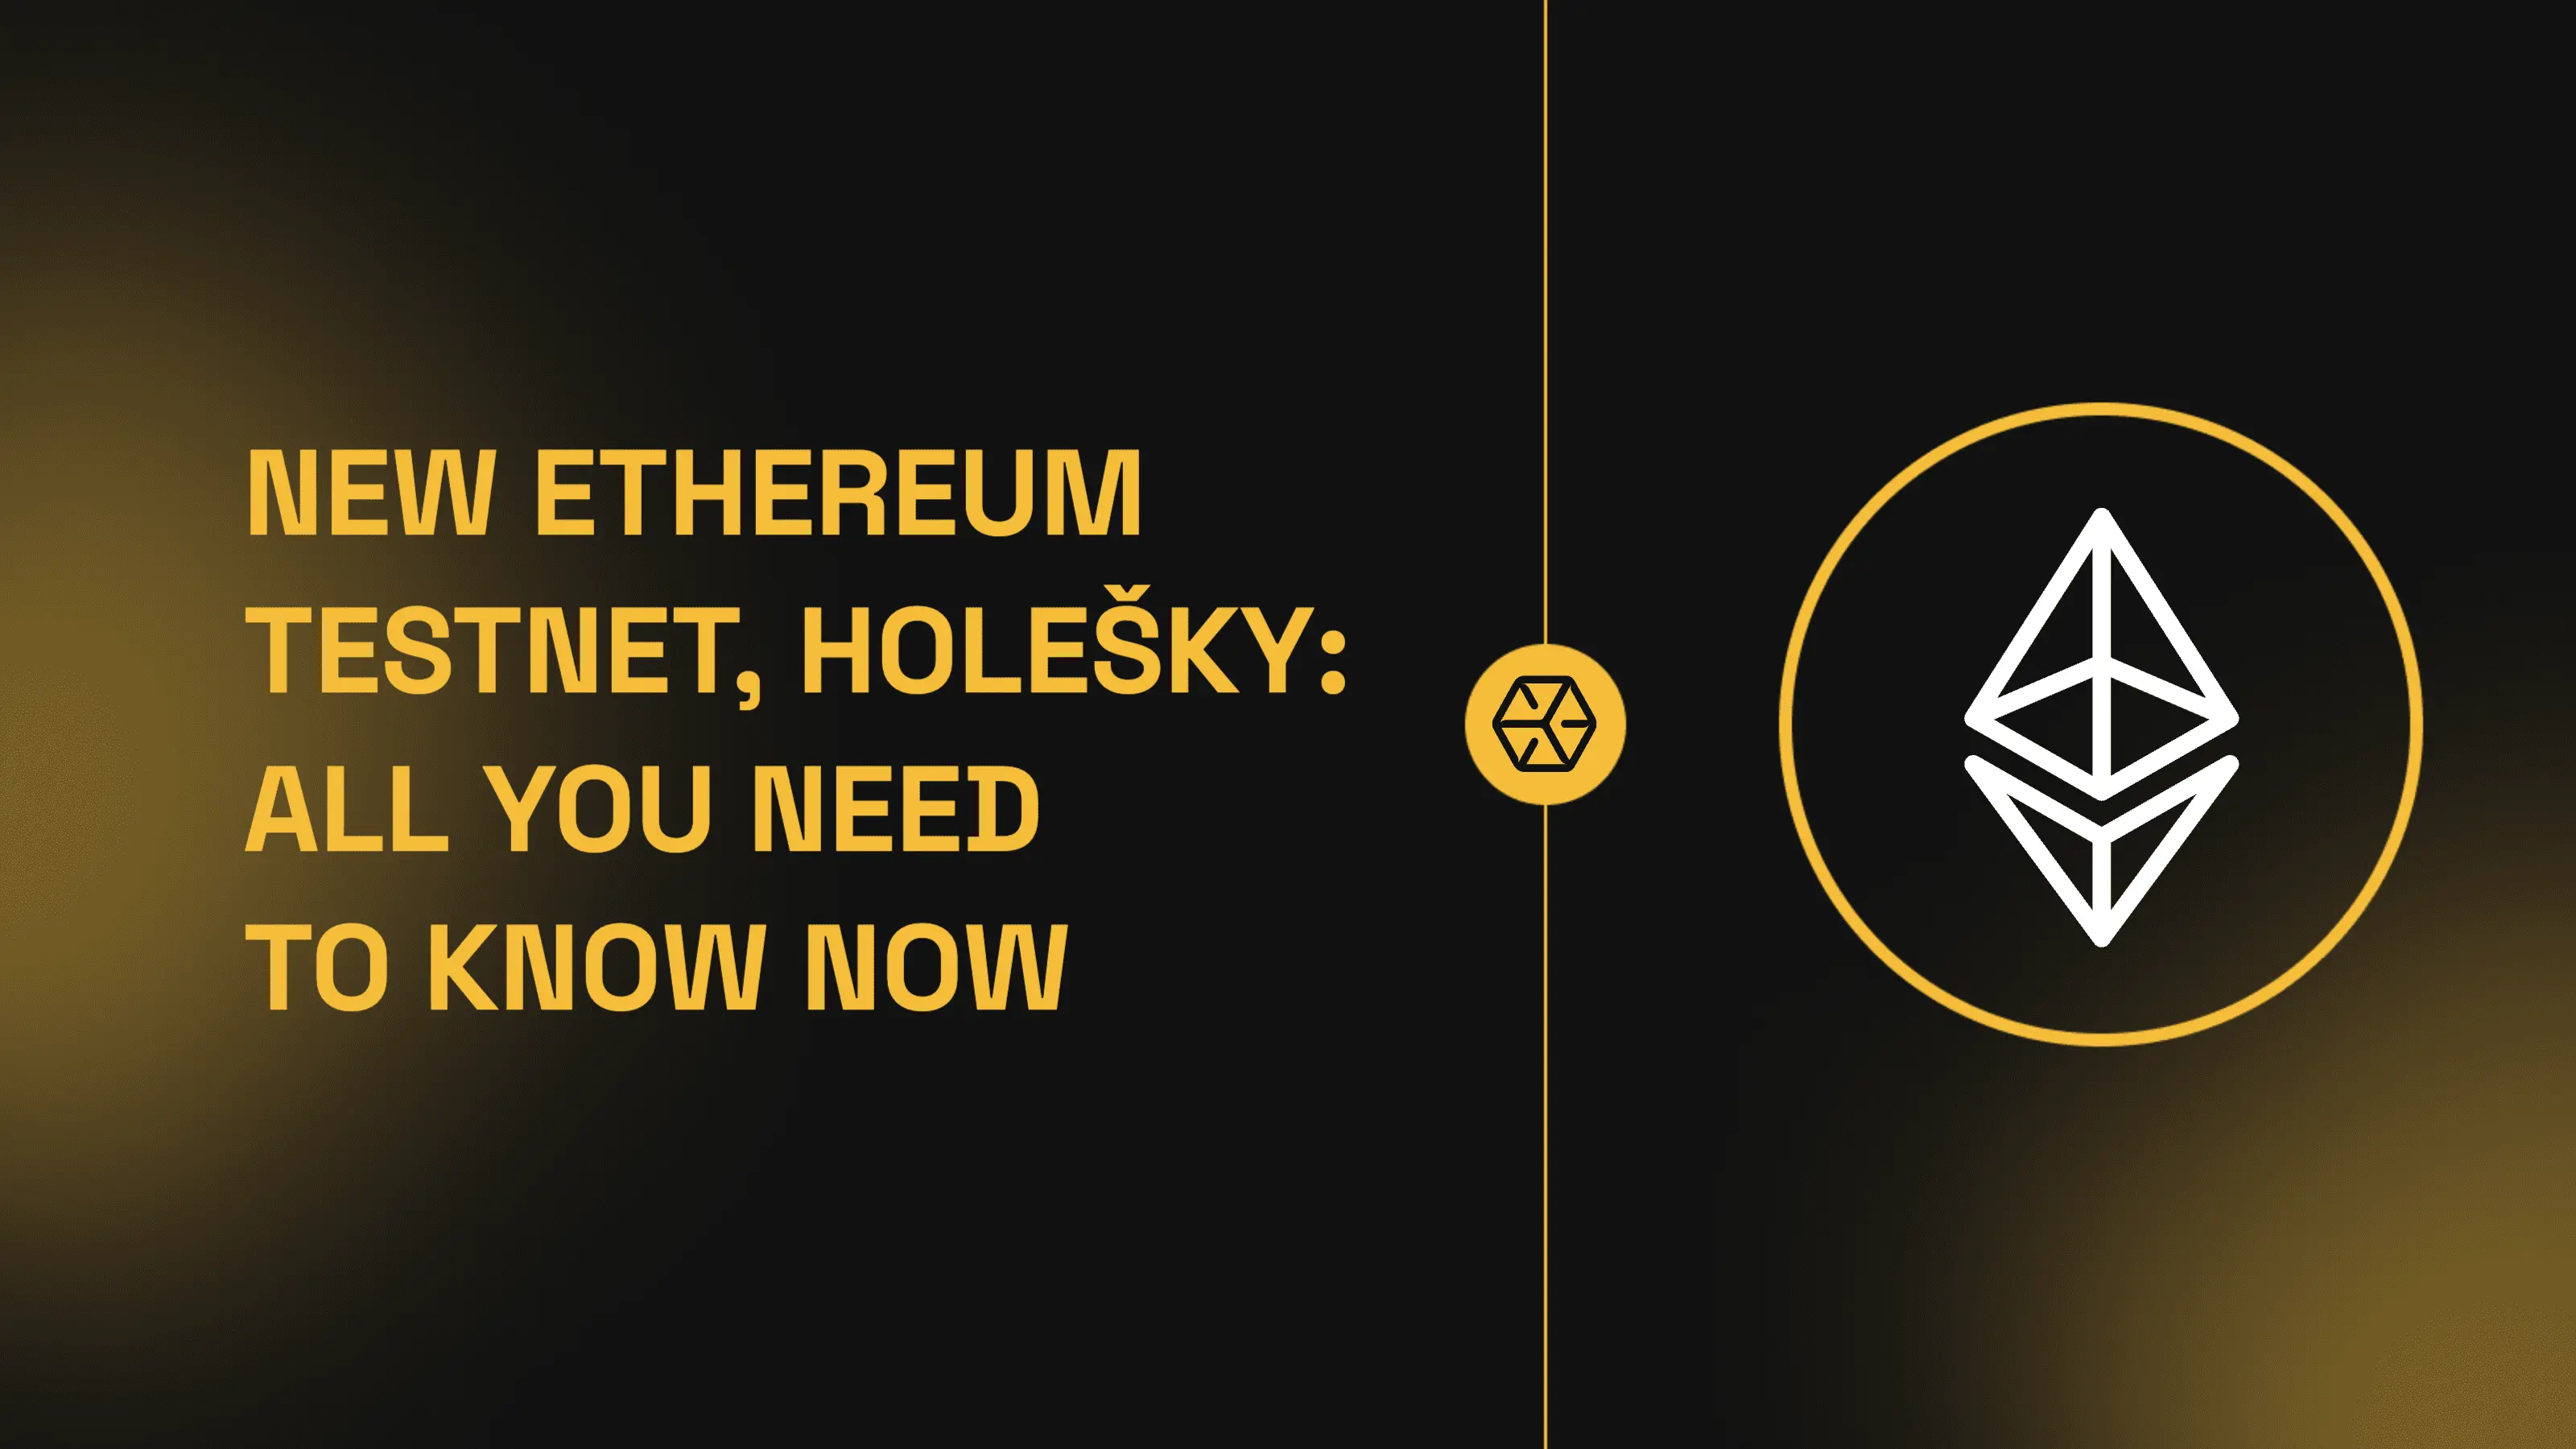 Ethereum's Holešky Testnet: A New Era for Development and Testing [UPDATED]